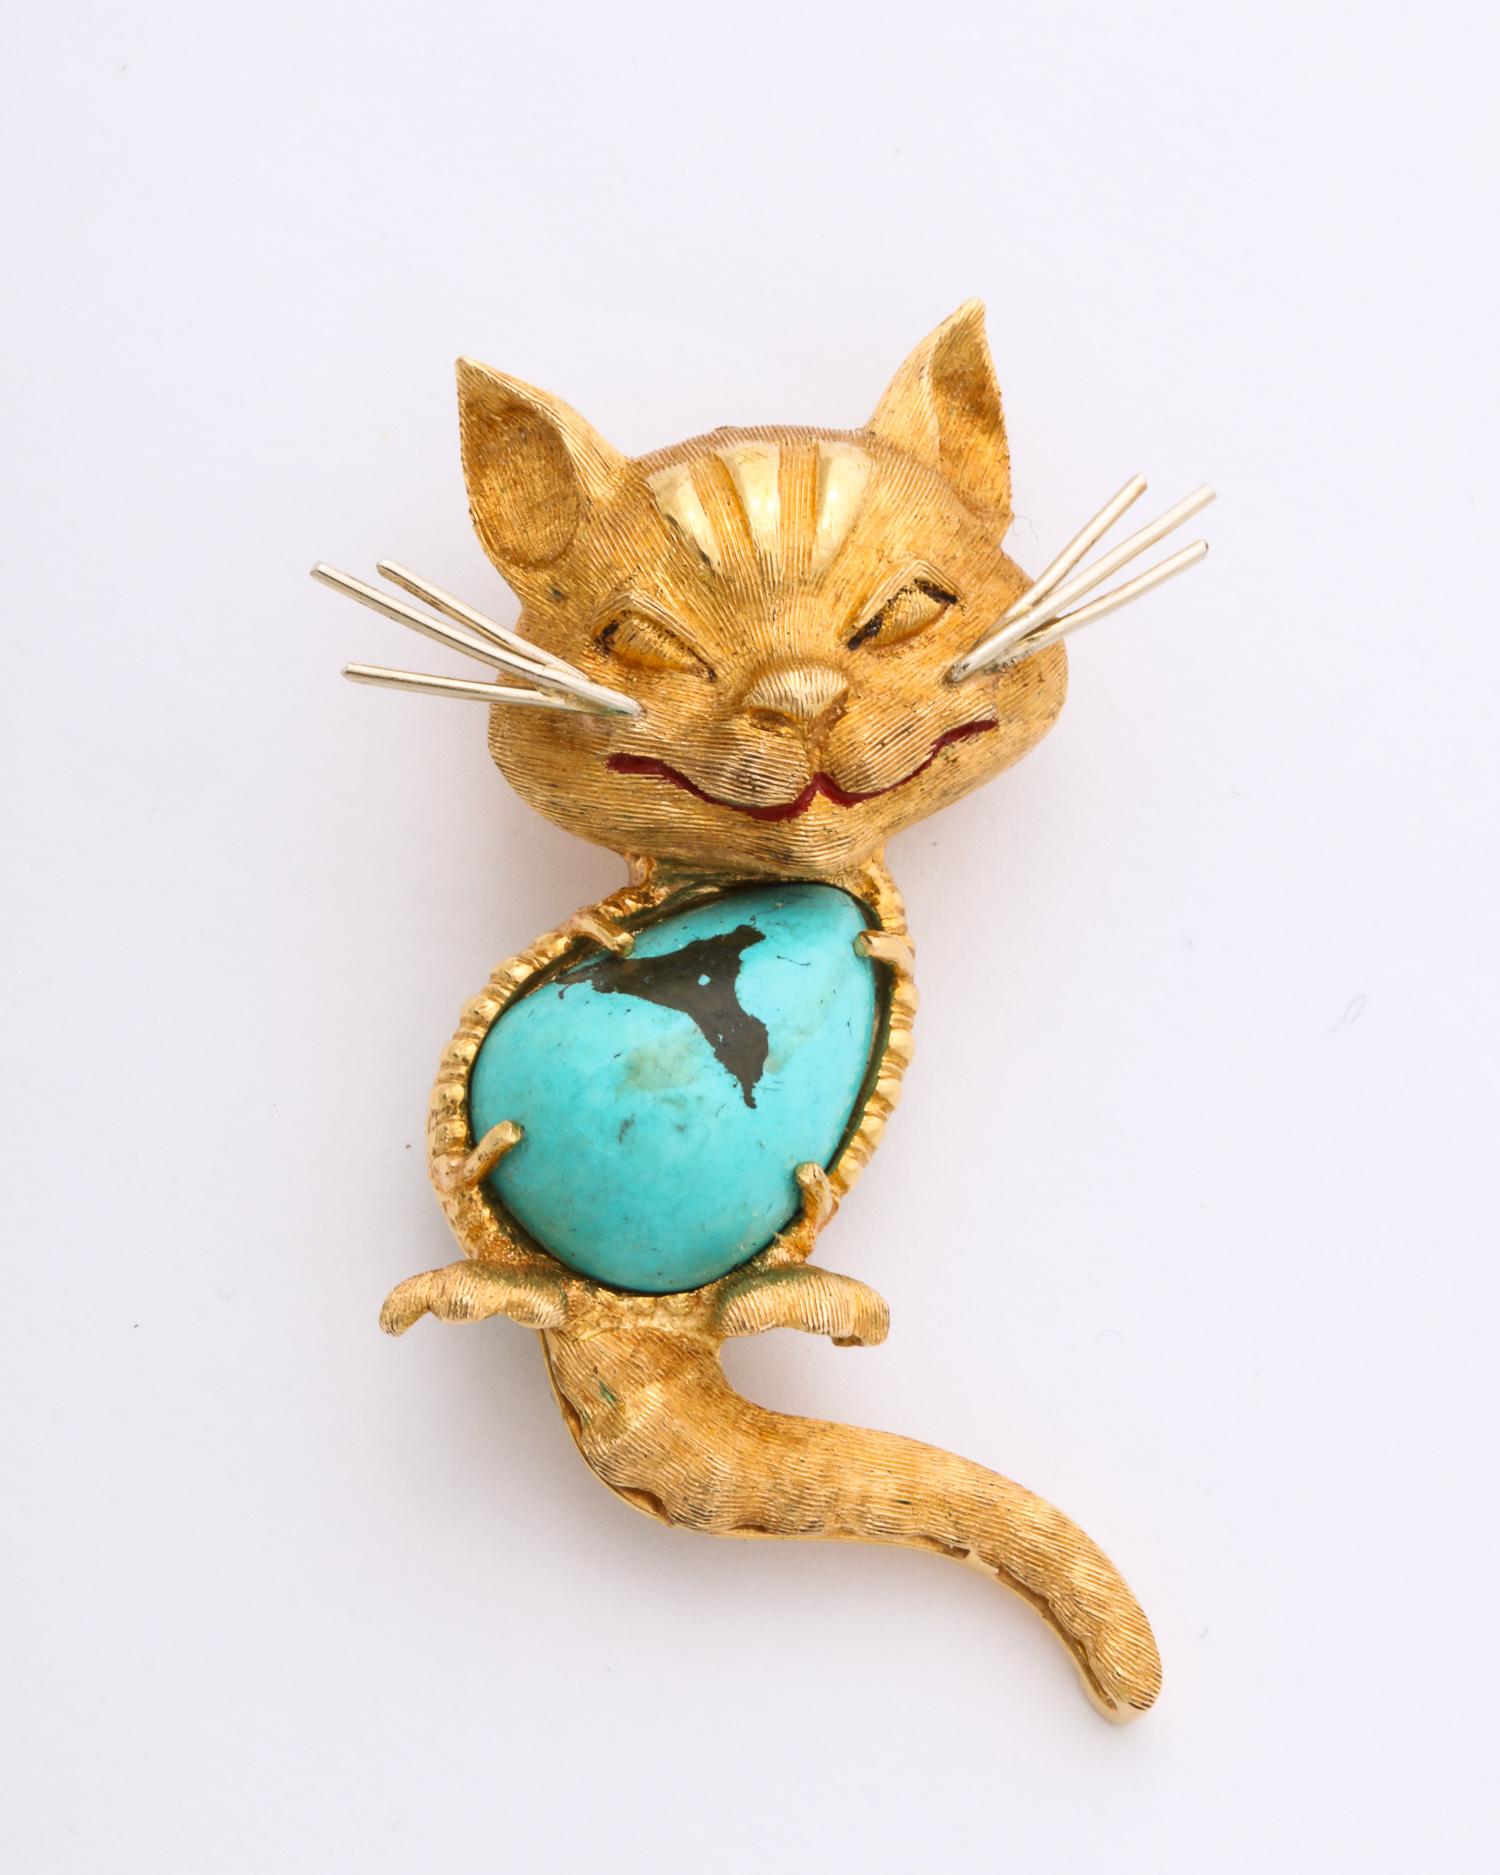 One Whimisical And Figural Kitty Cat Brooch Created With One Large Cabochon Natural Turquoise Stone Measuring Approx. 15Mm. Designed In 18kt Textured Gold Kitty Cat Is Smiling In A Cat That Swallowed The Canary Motif.Designed In The 1950's Stamped